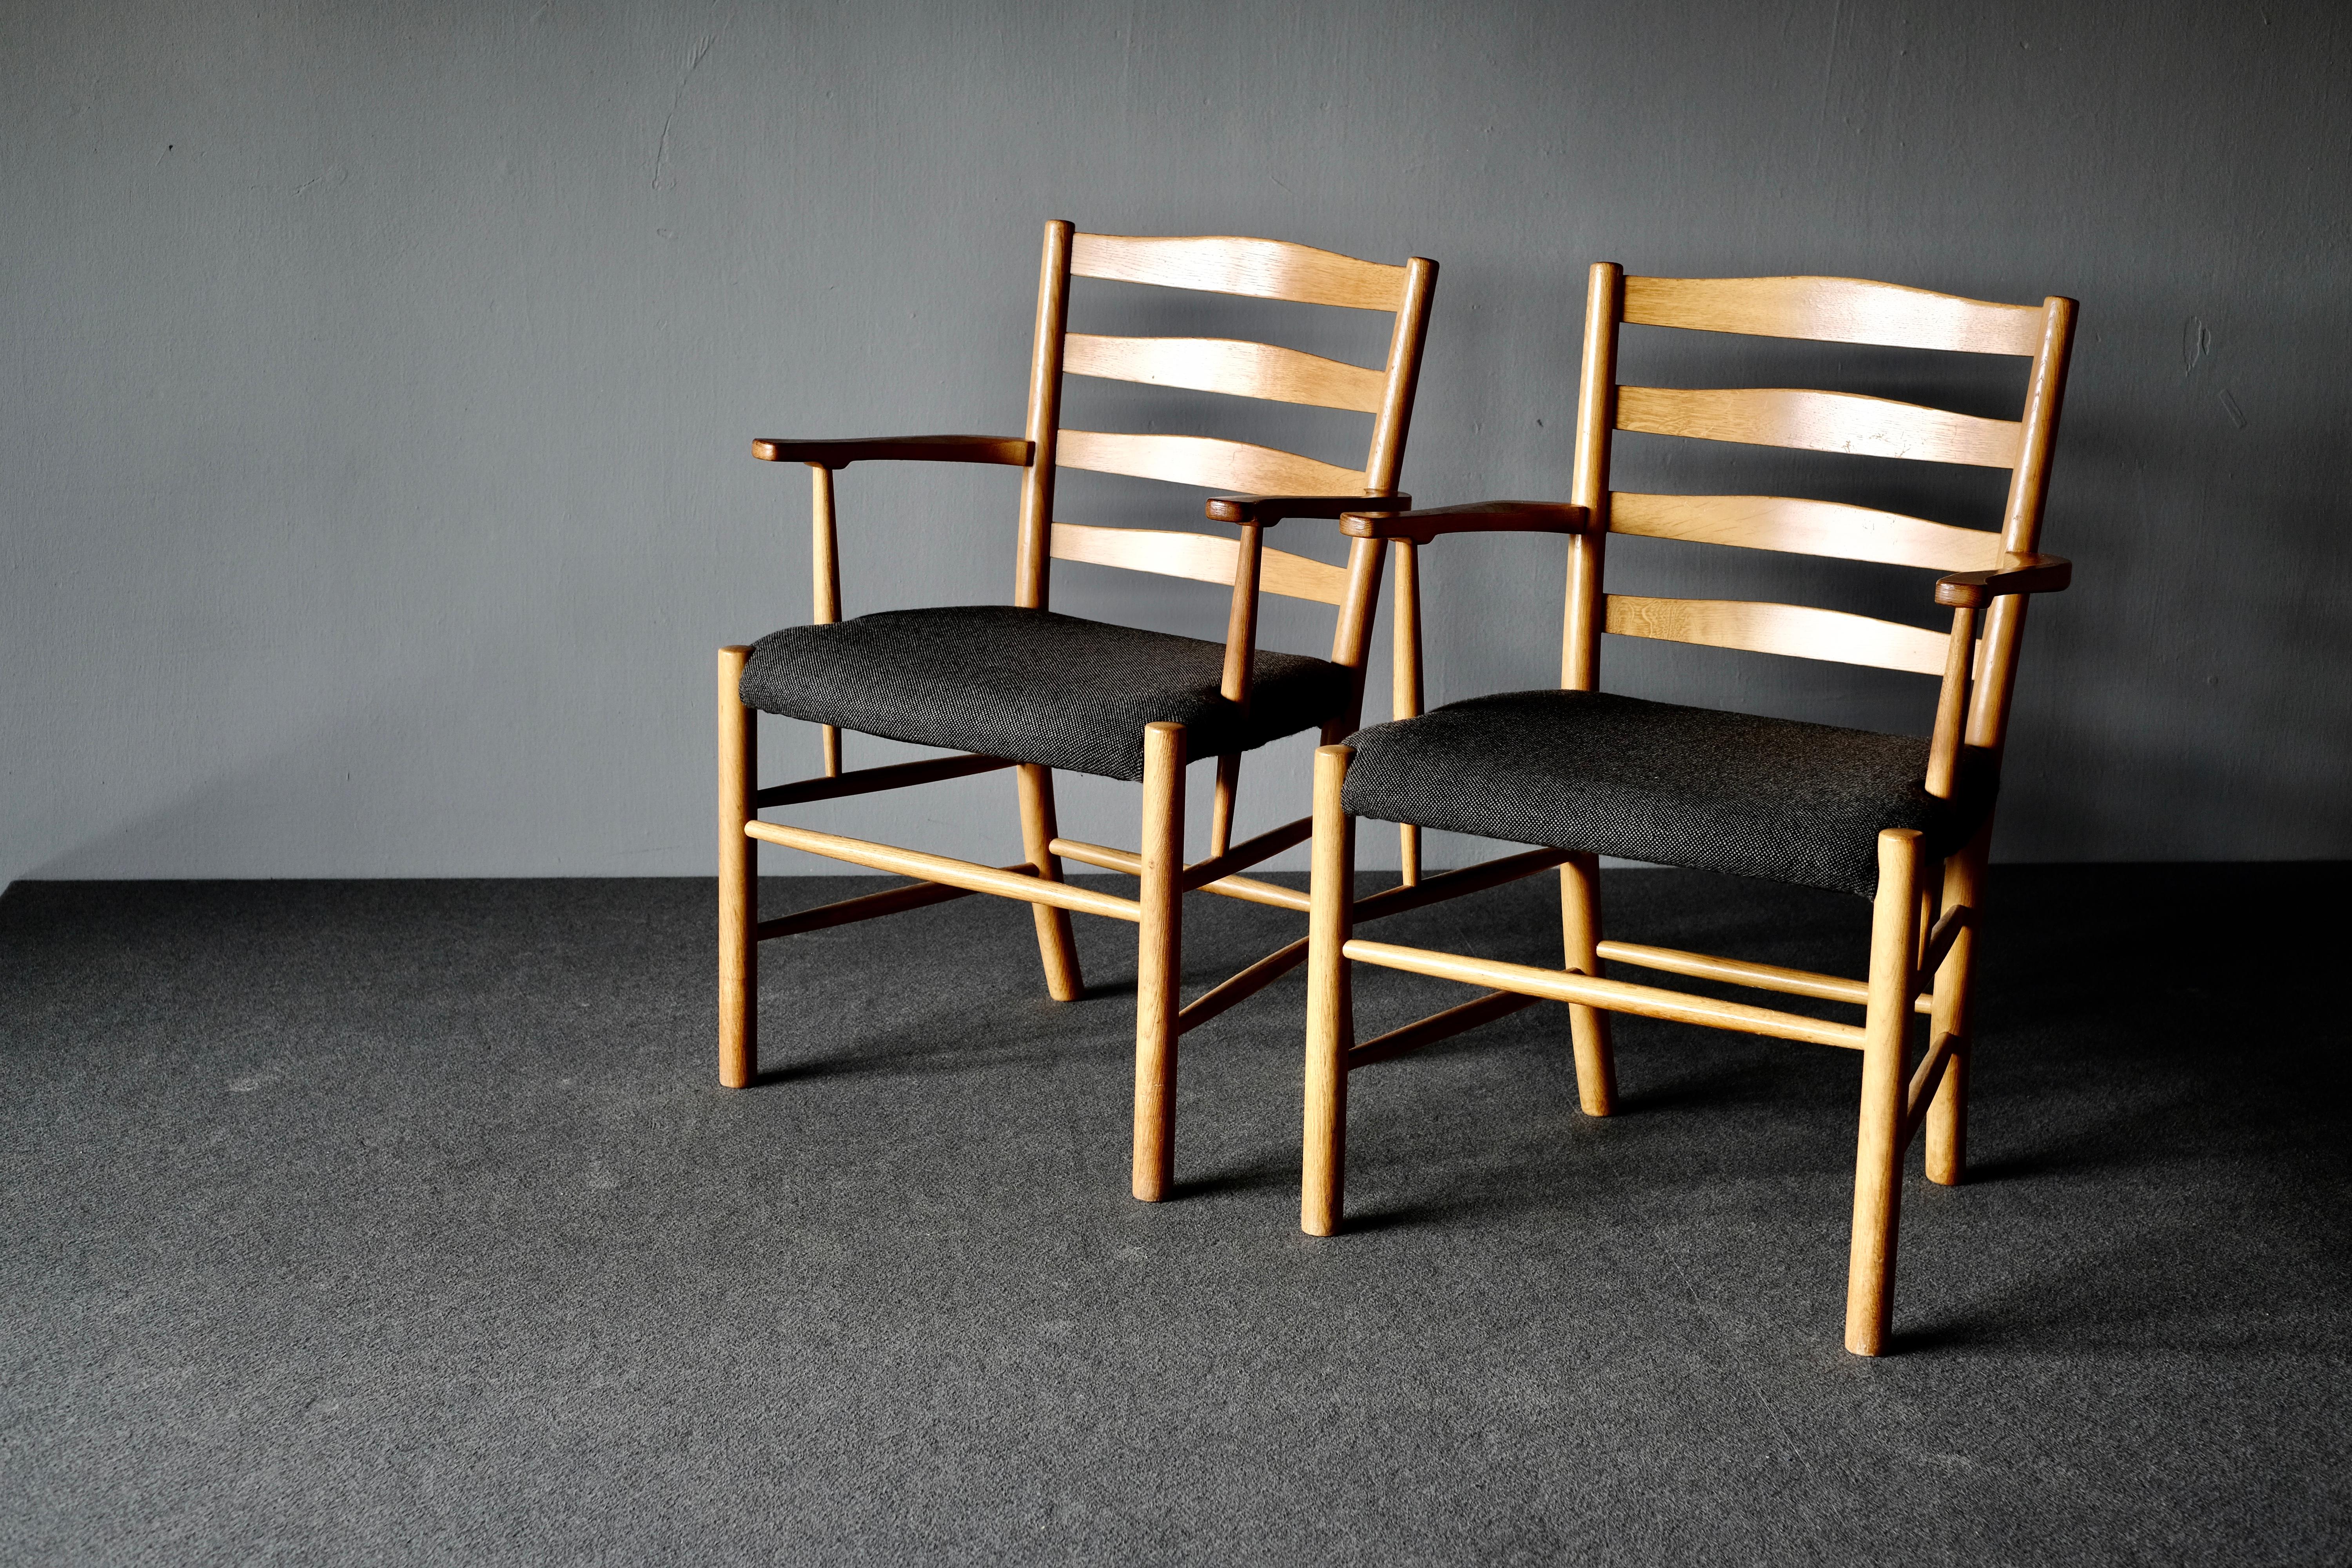 Church chairs, “Kirkestolen” by Kaare Klint and manufactured by Fritz Hansen. They are in oak, which has taken on a wonderful patina over the years. The seats are upholstered in wool.

Kaare Klint is acknowledged as one of the most influential